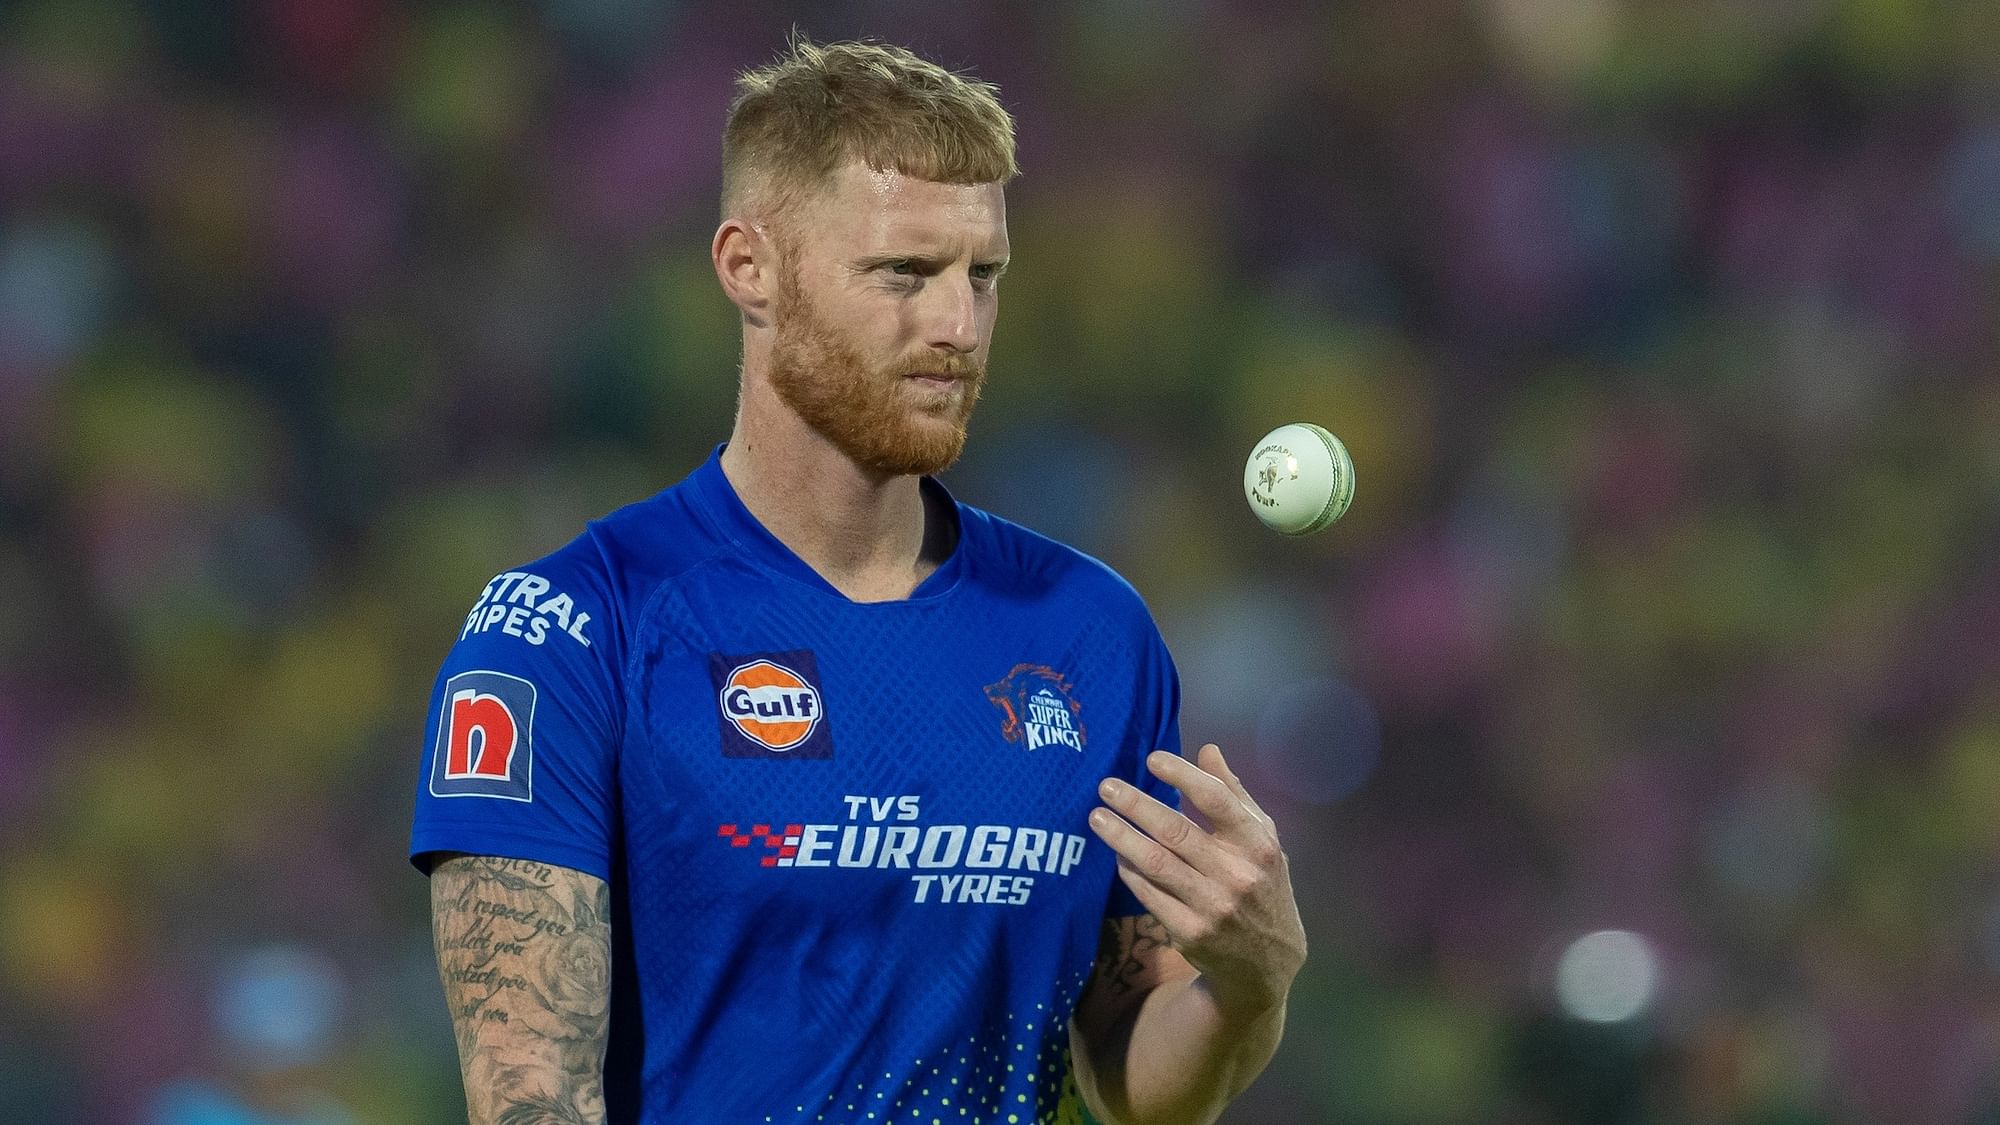 <div class="paragraphs"><p>IPL 2023: Ben Stokes will not be available for selection in playoffs, should Chennai Super Kings qualify.</p></div>